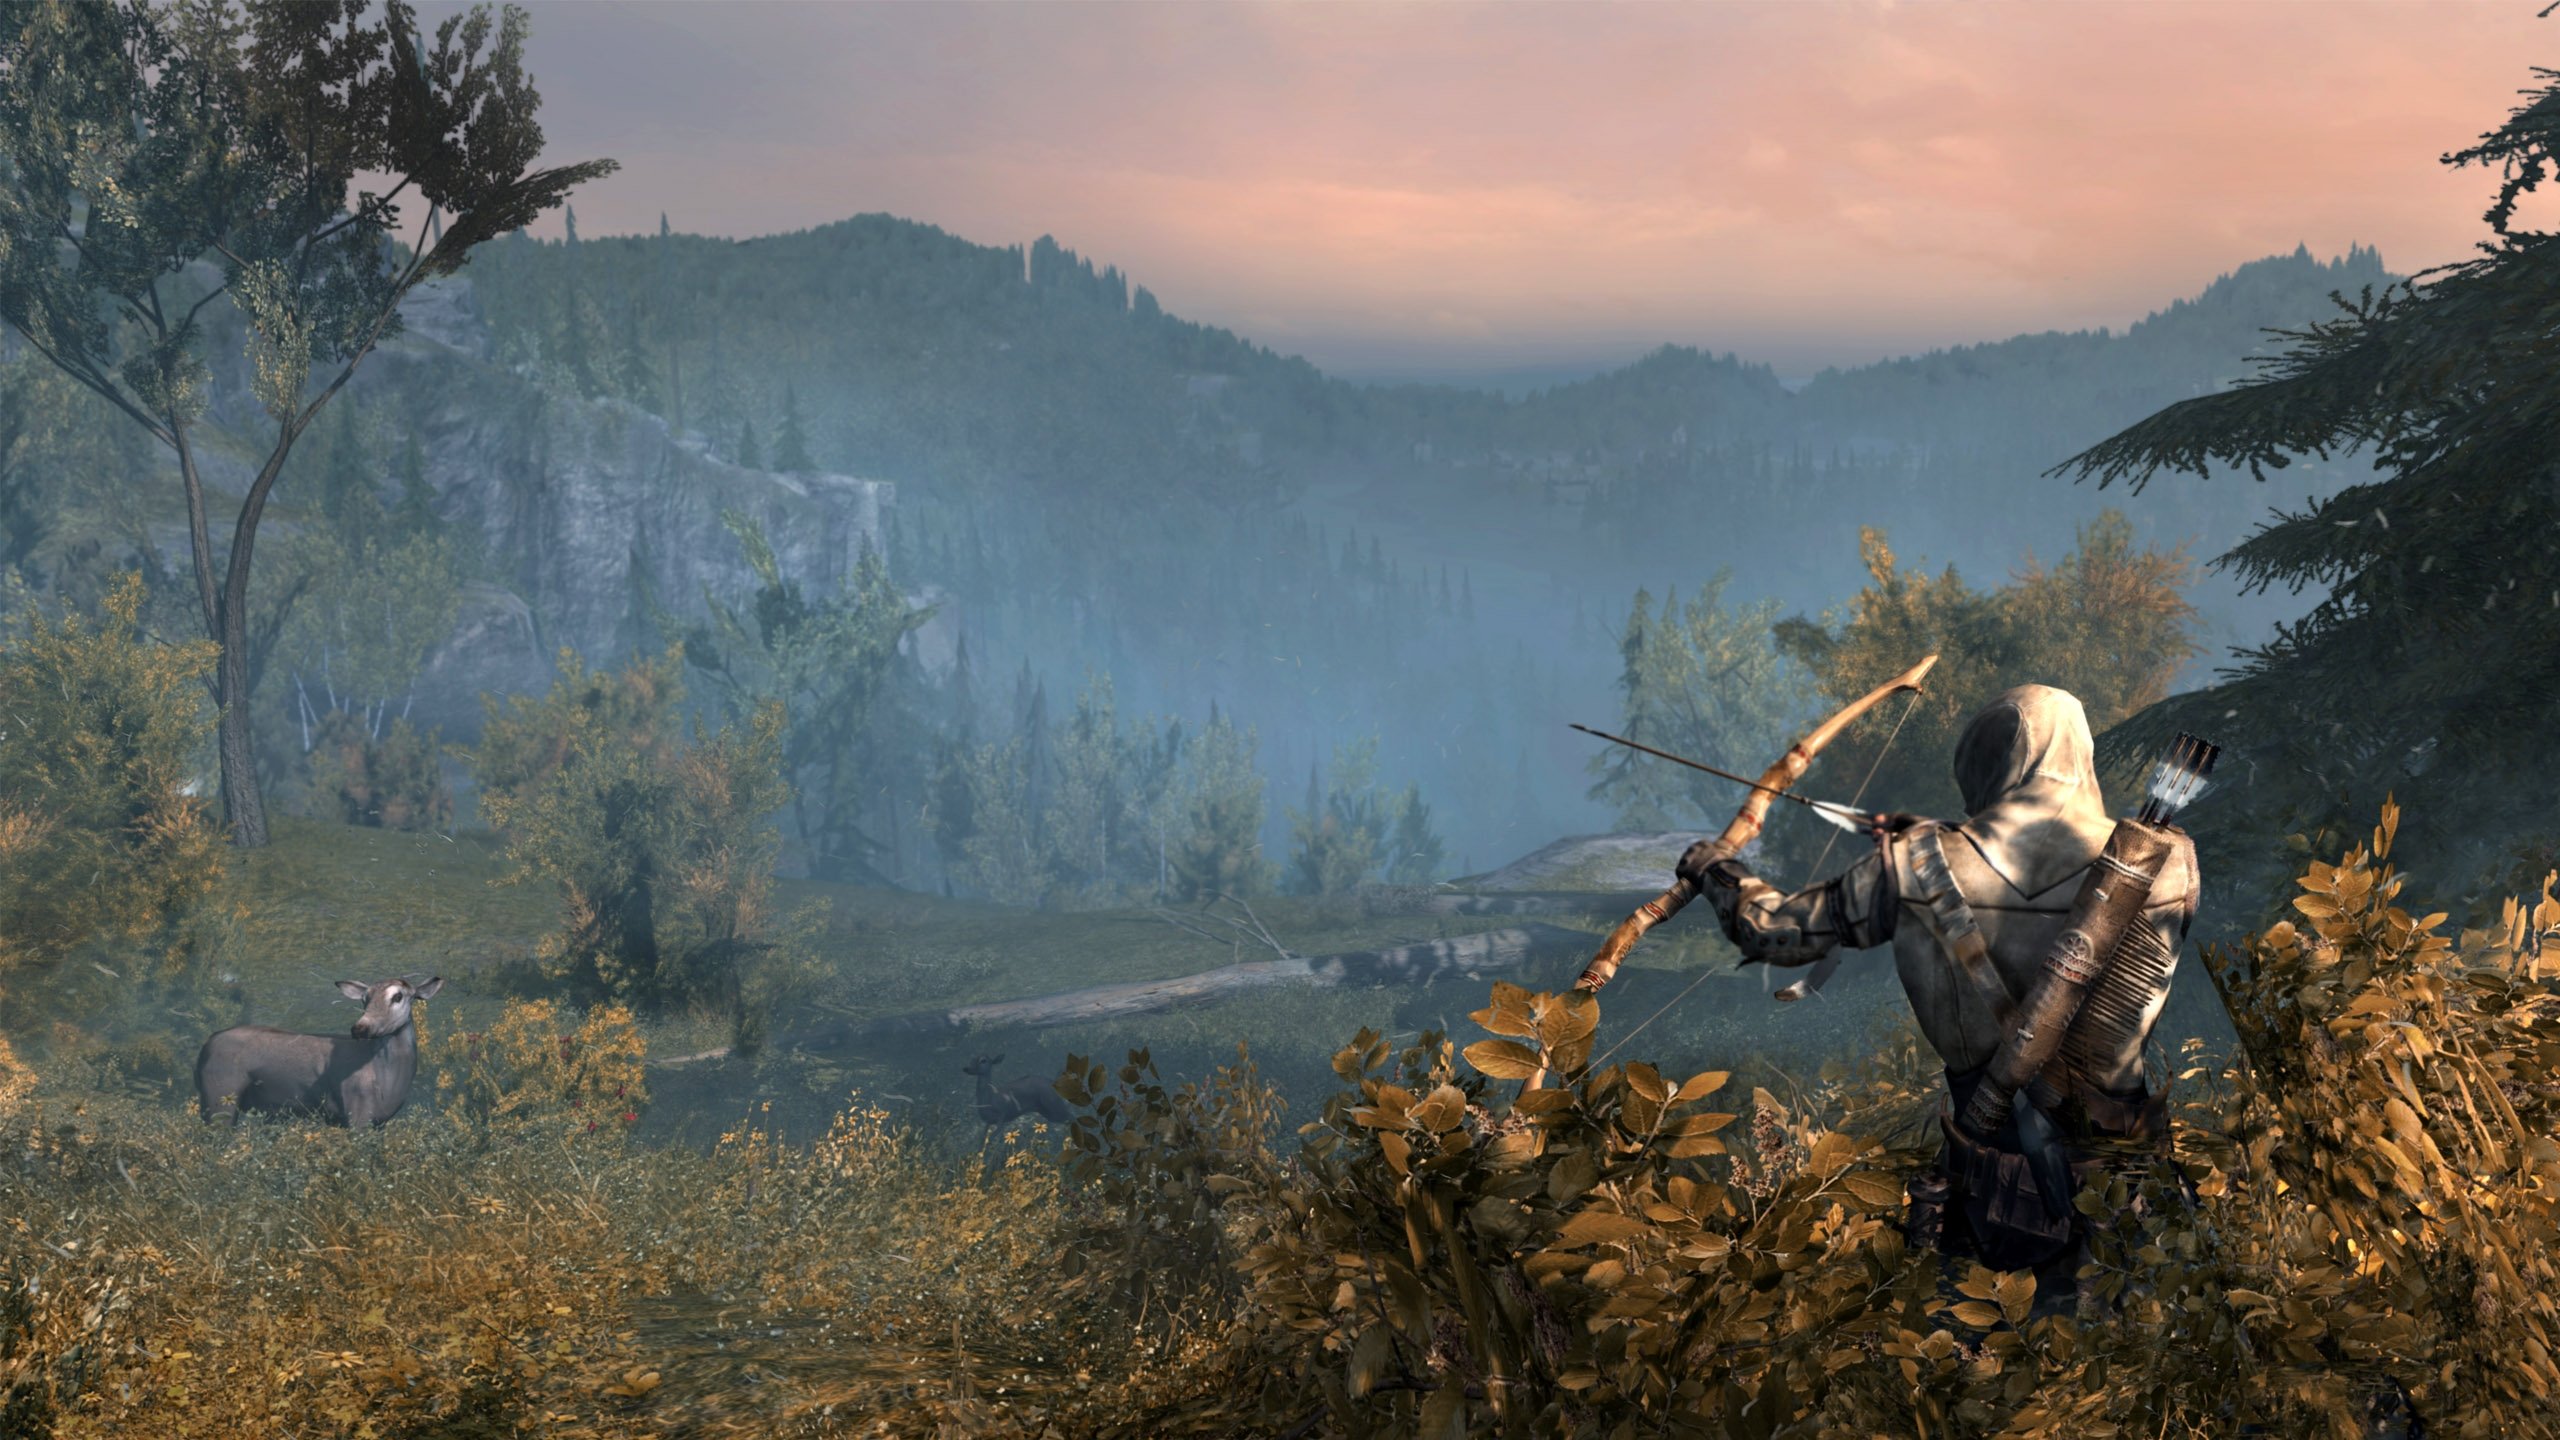 bow, Hunting, Archery, Archer, Bow, Arrow, Hunting, Weapon, Assassins, Creed Wallpaper